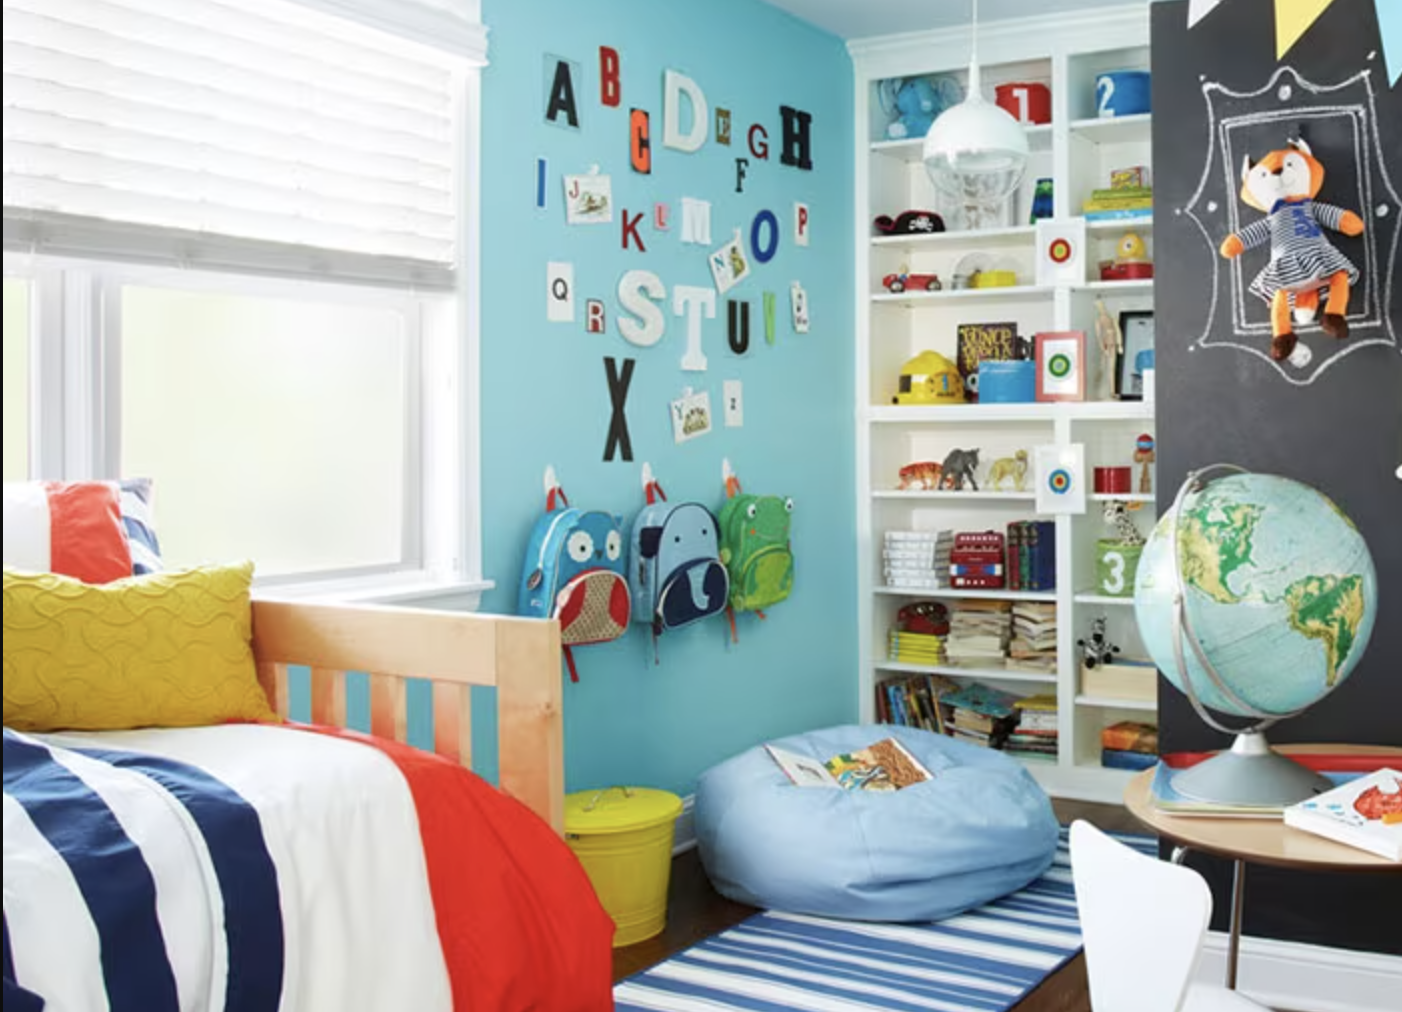 Command hooks used to hang backpacks in kid's room